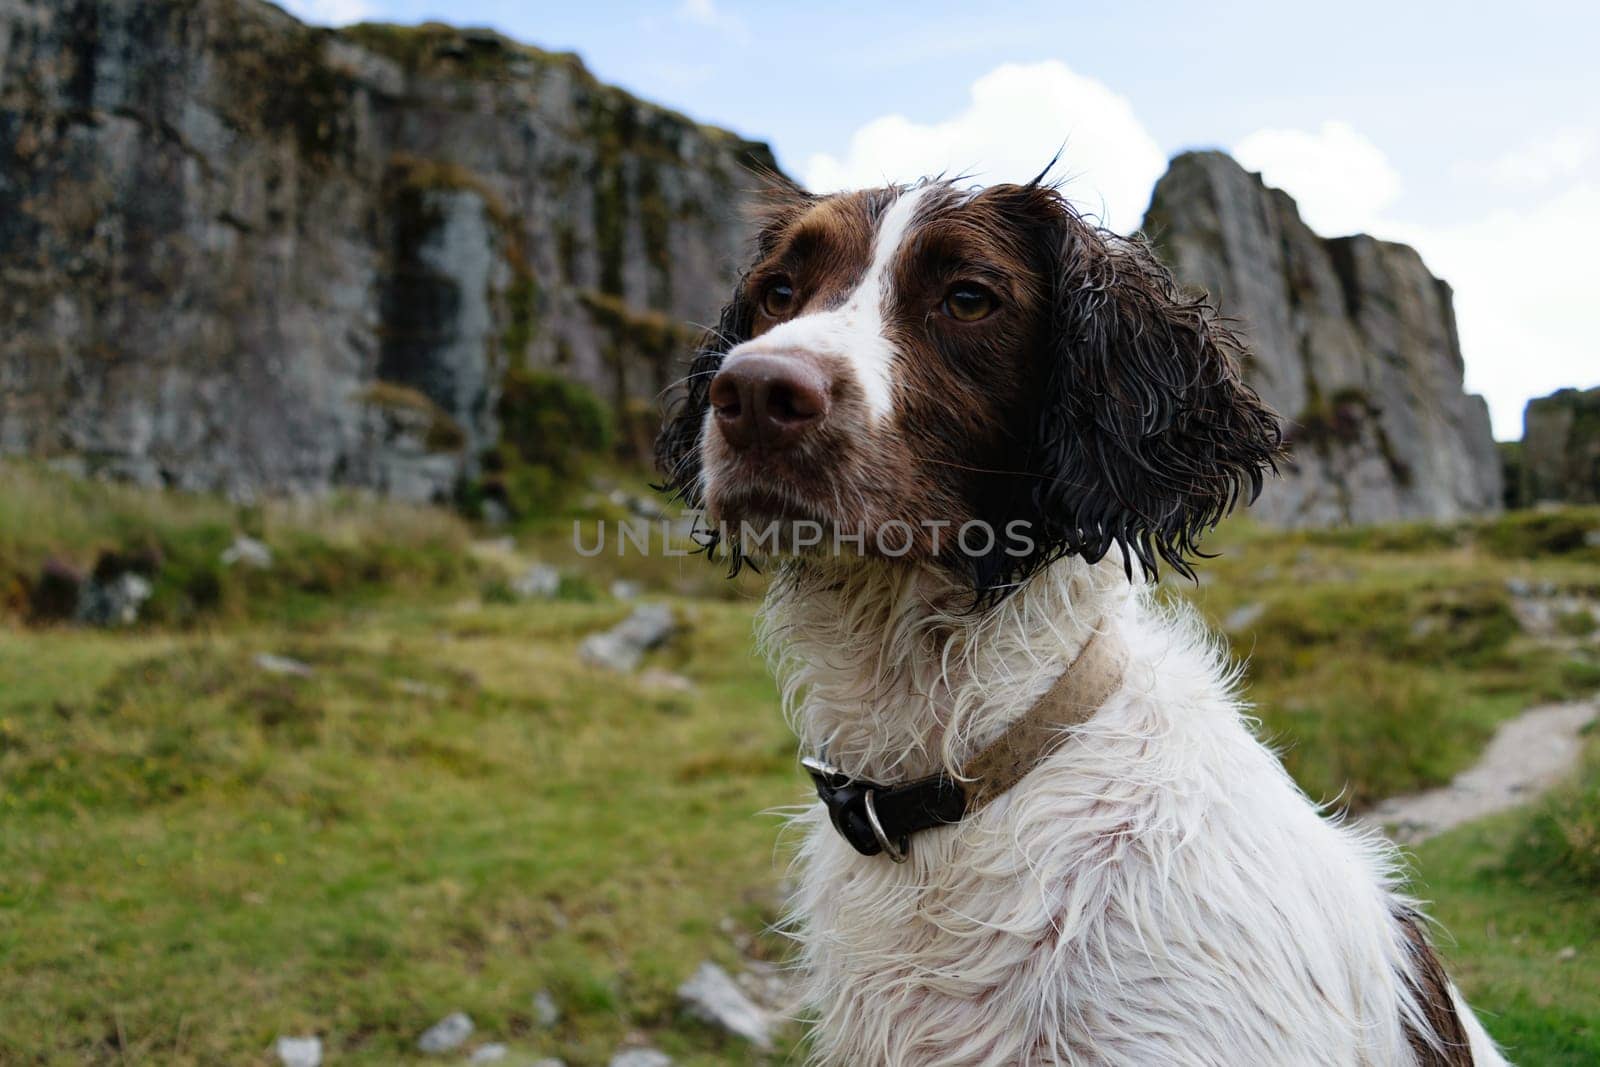 A wet dog with a collar standing outdoors in a rocky and grassy area, looking into the distance. The background features large rock formations and a cloudy sky.